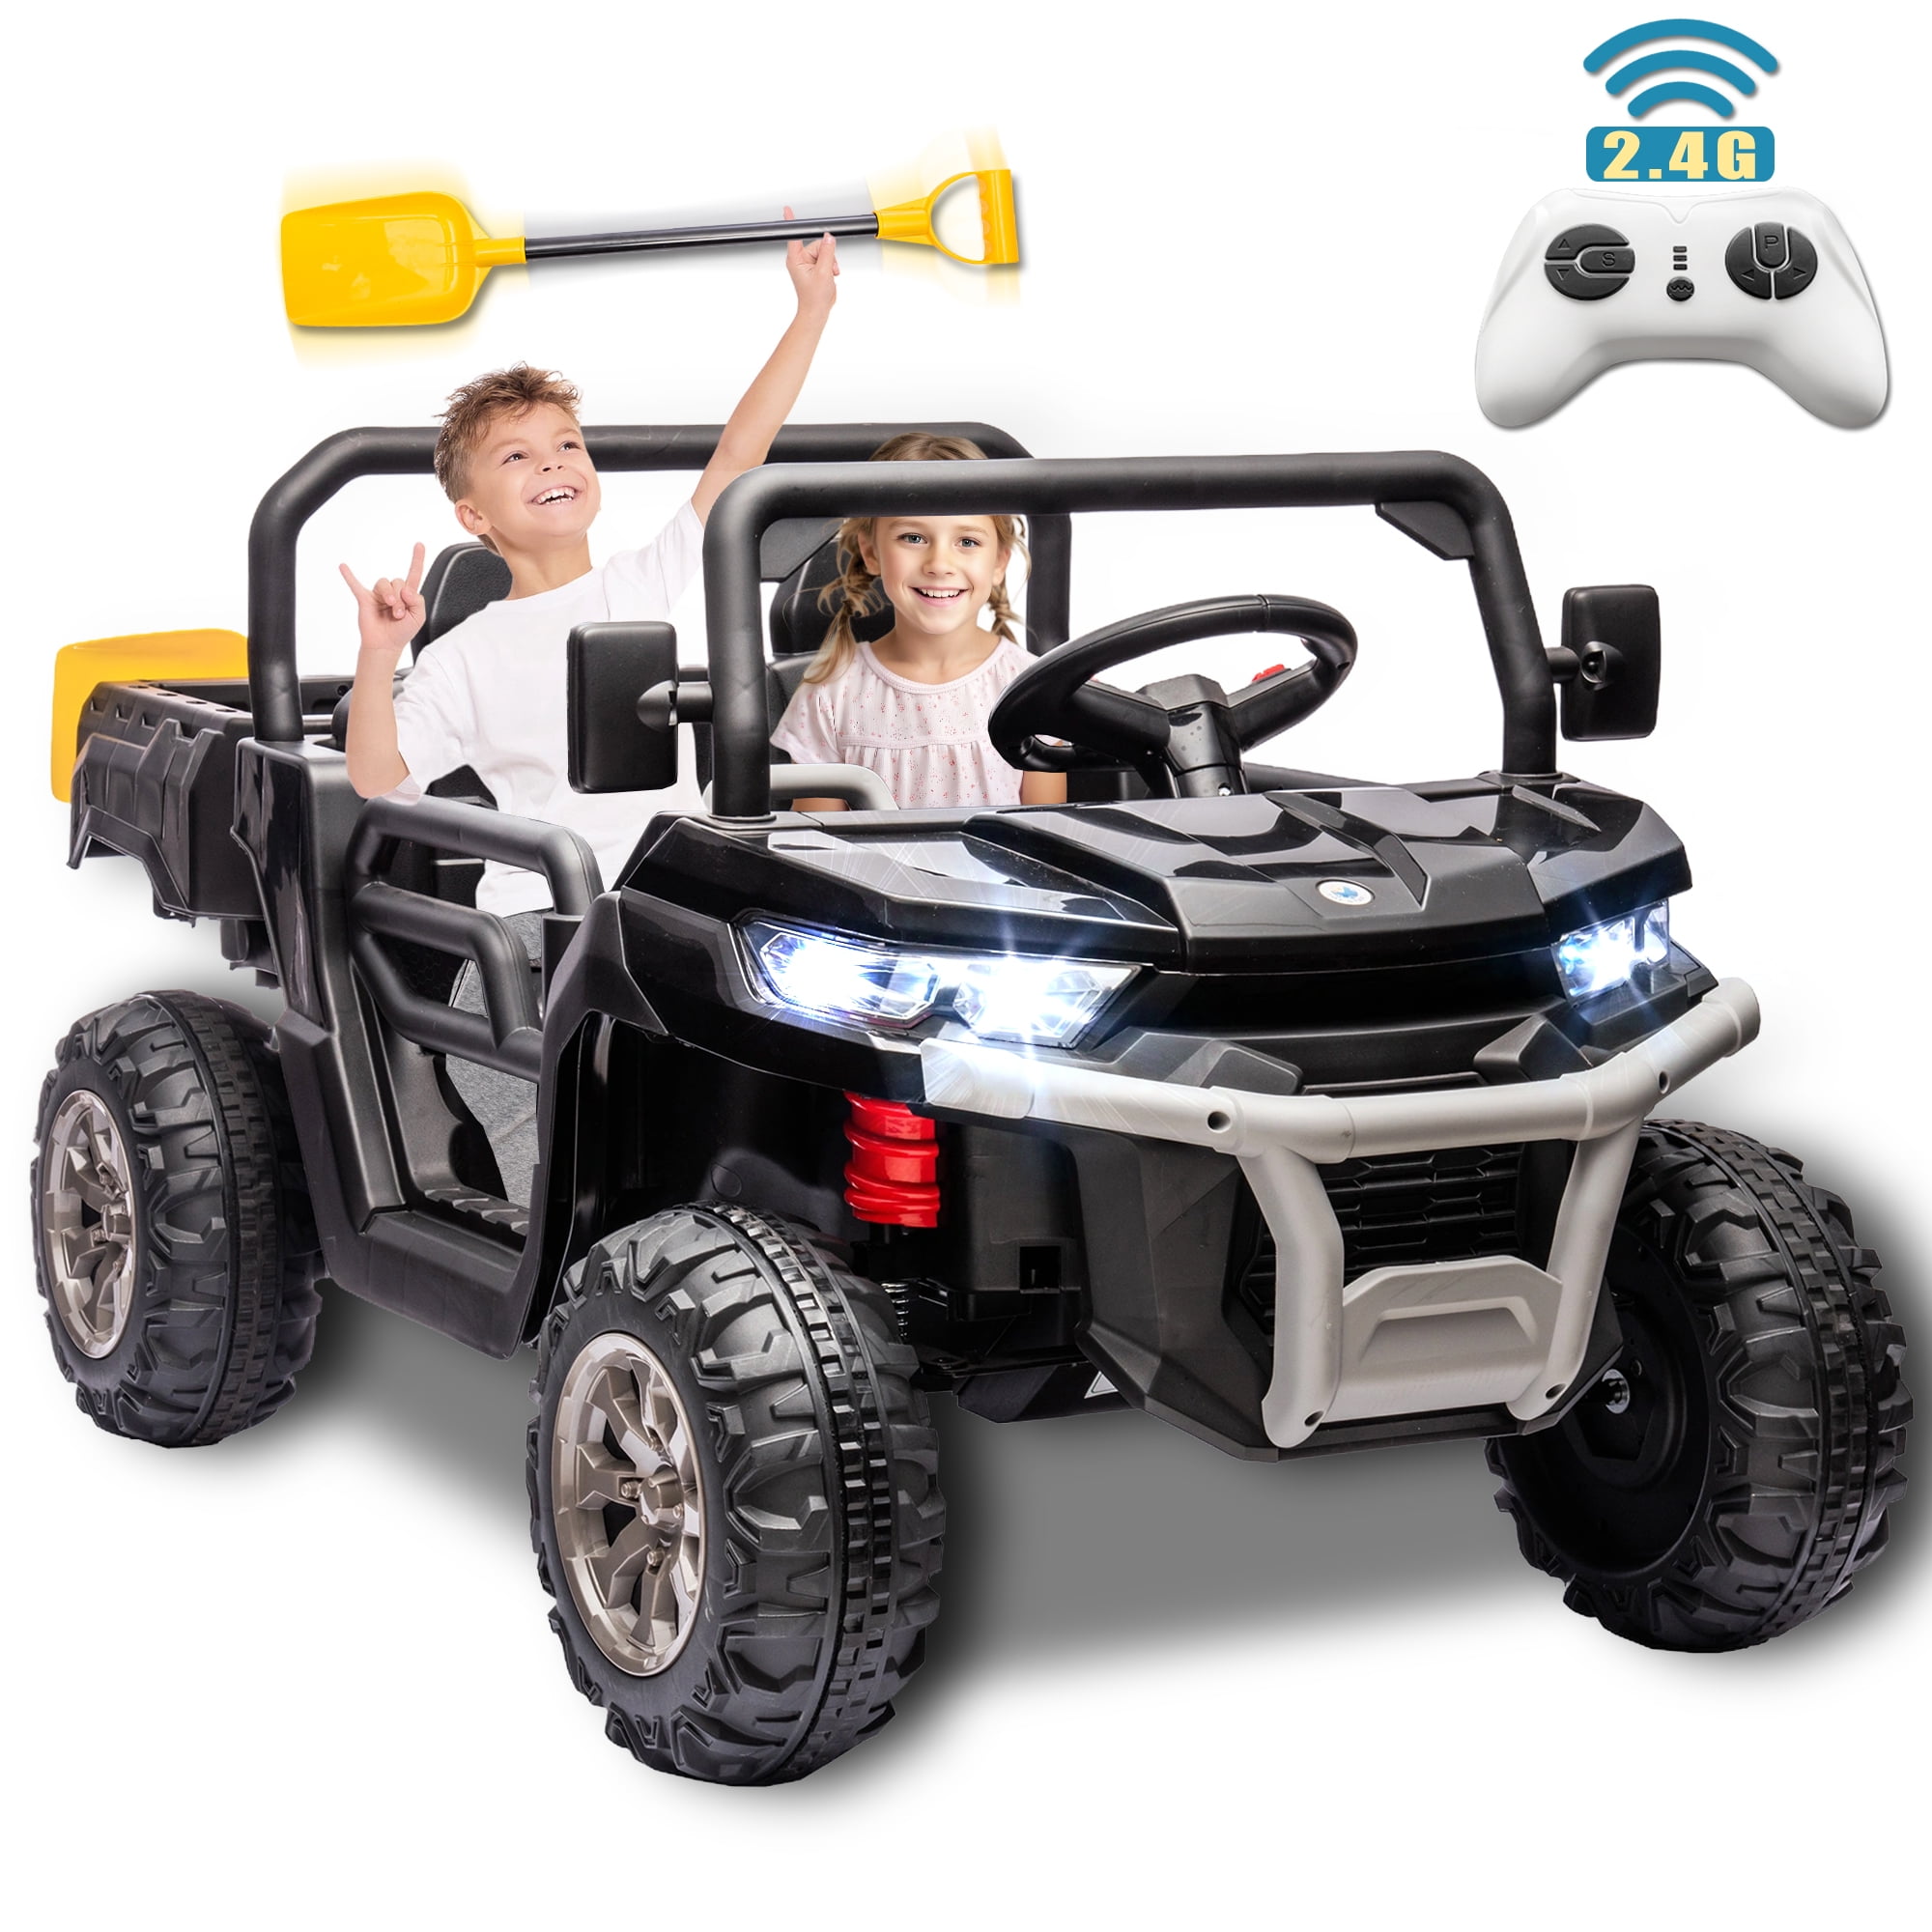 Hikiddo 24V Ride on Toys, 2-Seater Ride on Police Car Truck with